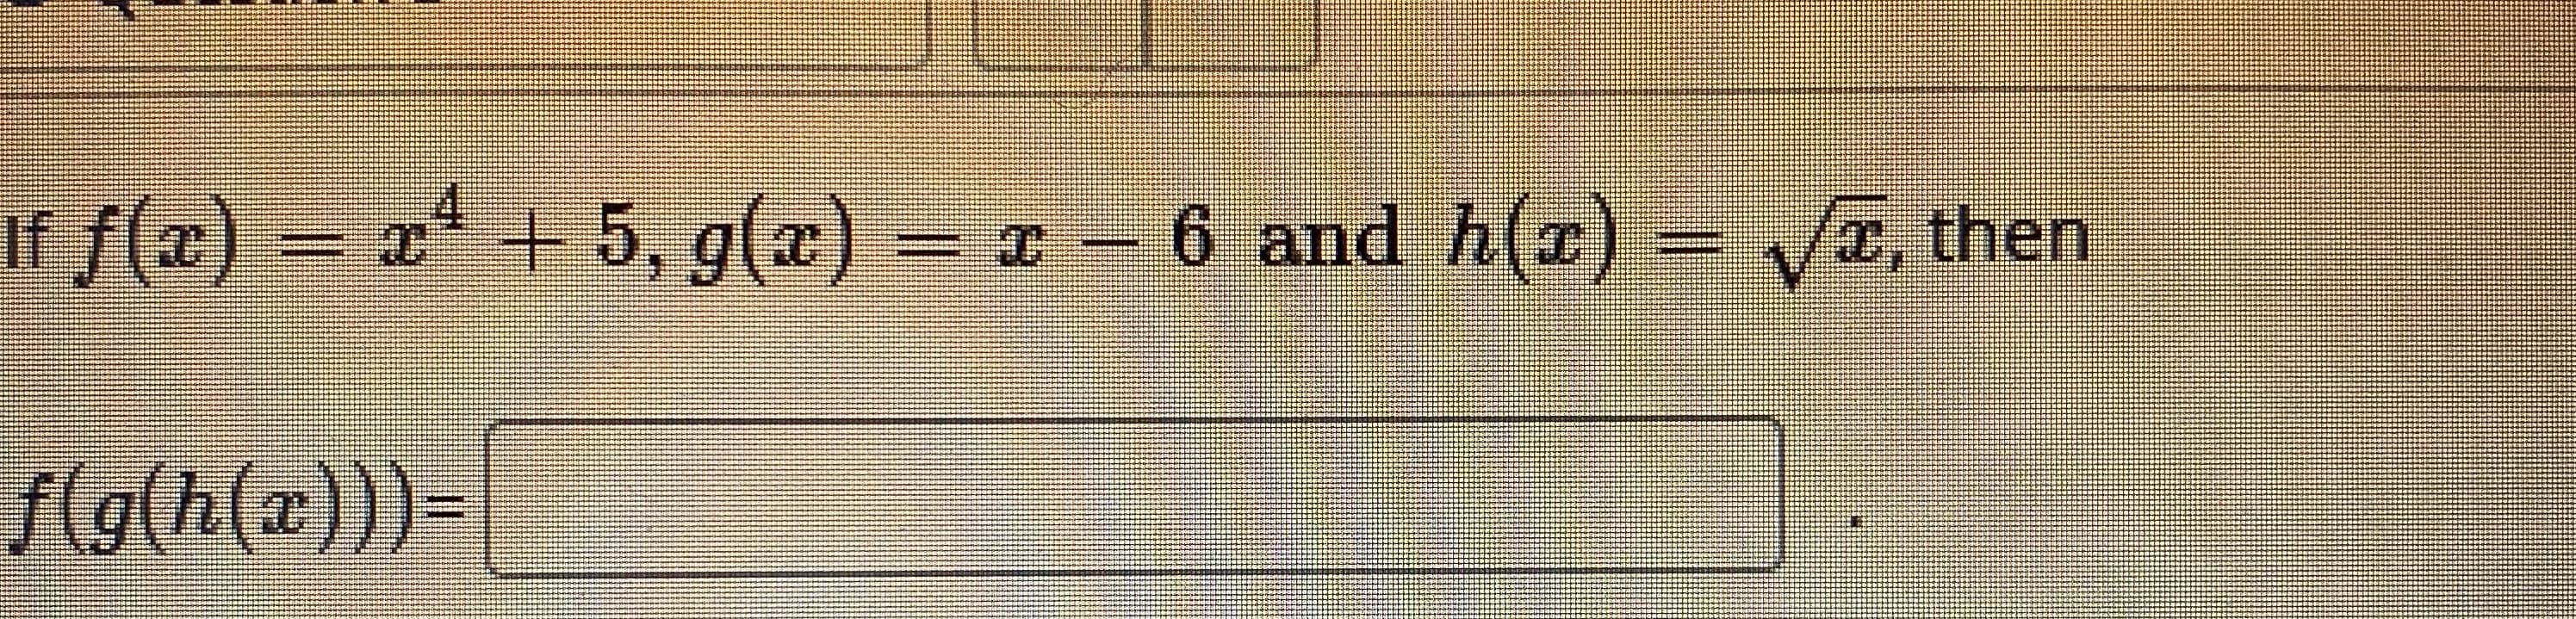 If f(a)
x* + 5, g(a)
=-6 and h(z) a, then
